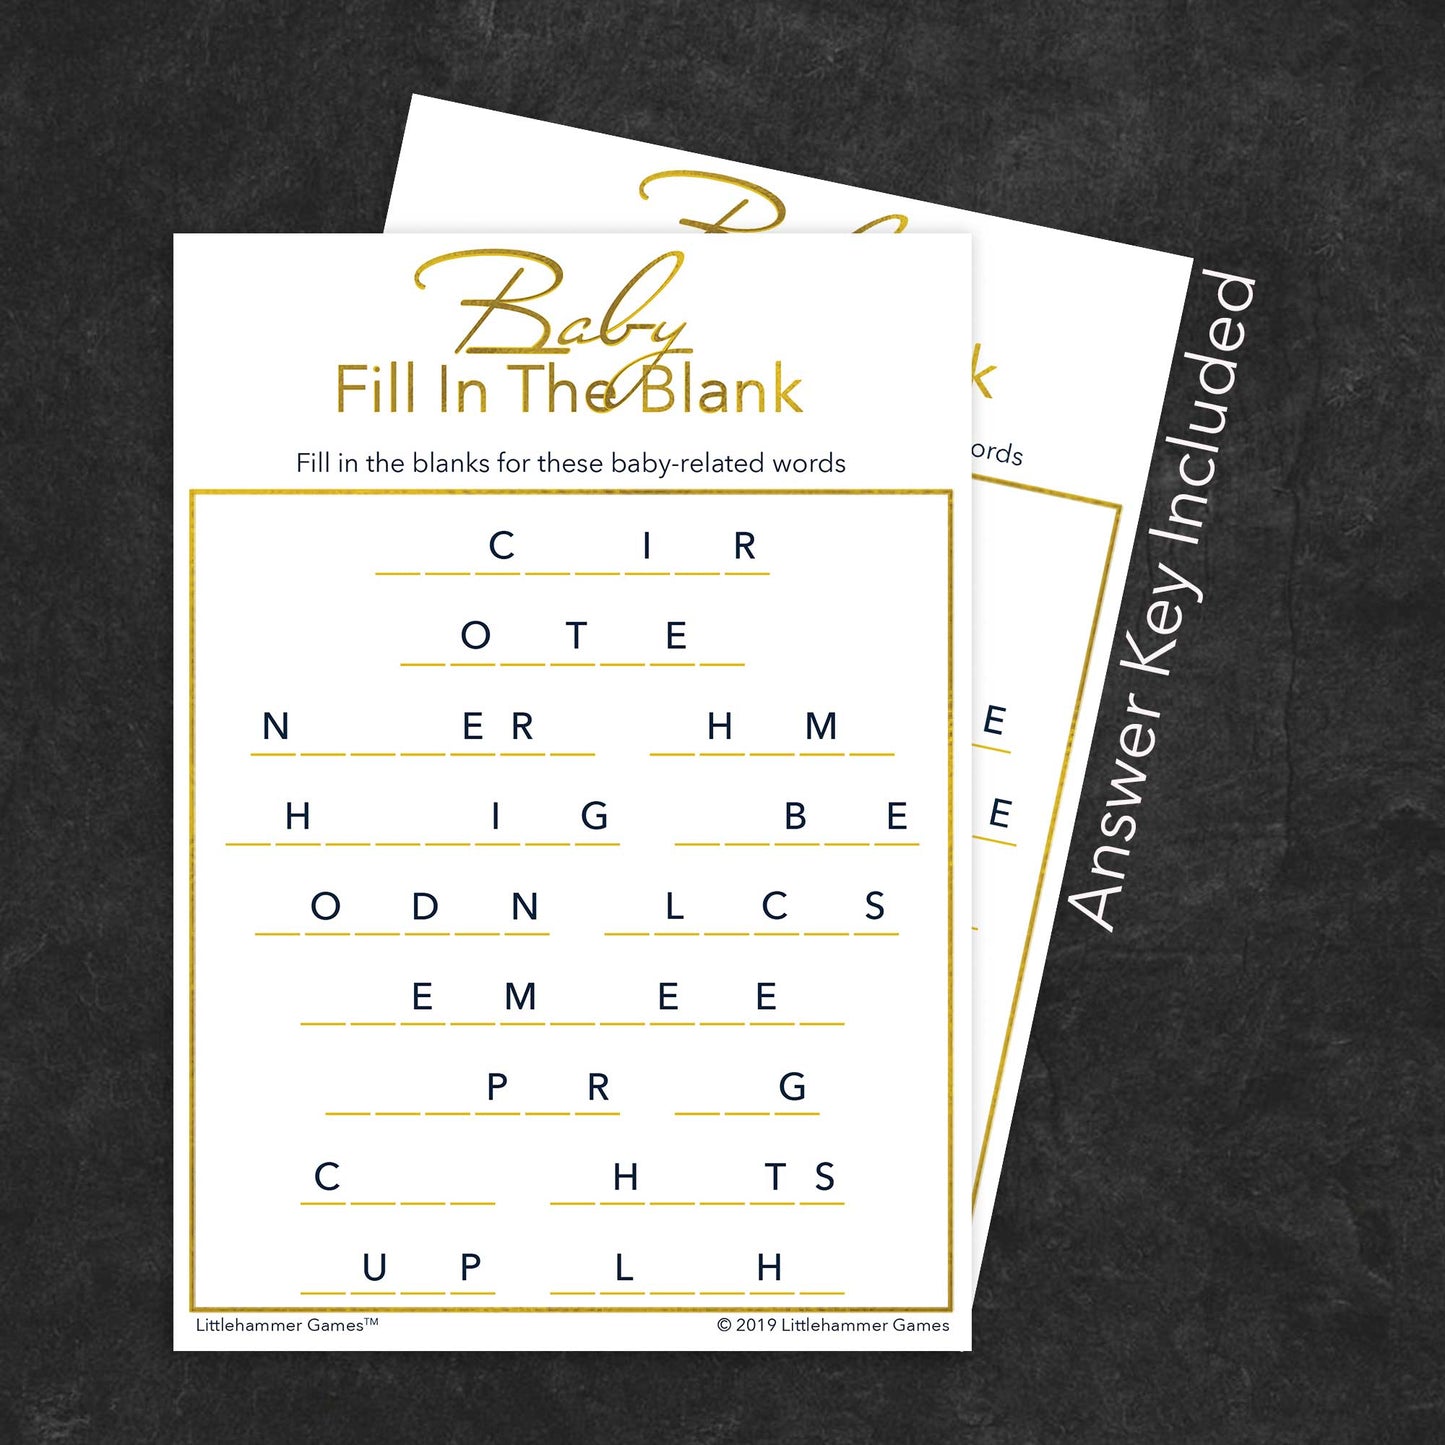 Baby Fill in the Blank game card with a gold and white background with answer card tucked behind it on a slate background with white text that says "Answer Key Included"